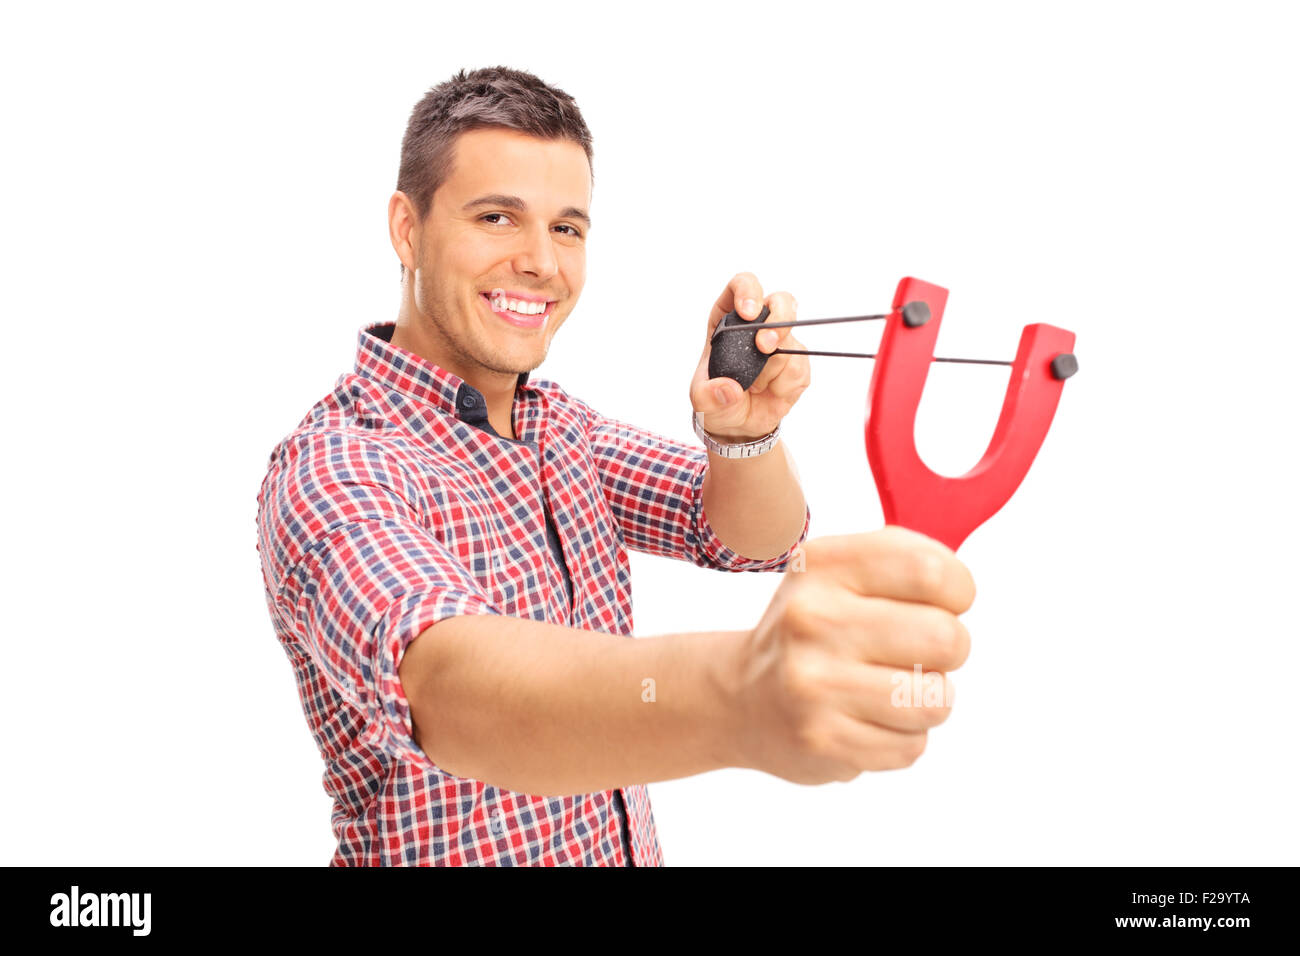 Young joyful guy shooting a rock from a slingshot and looking at the camera  isolated on white background Stock Photo - Alamy